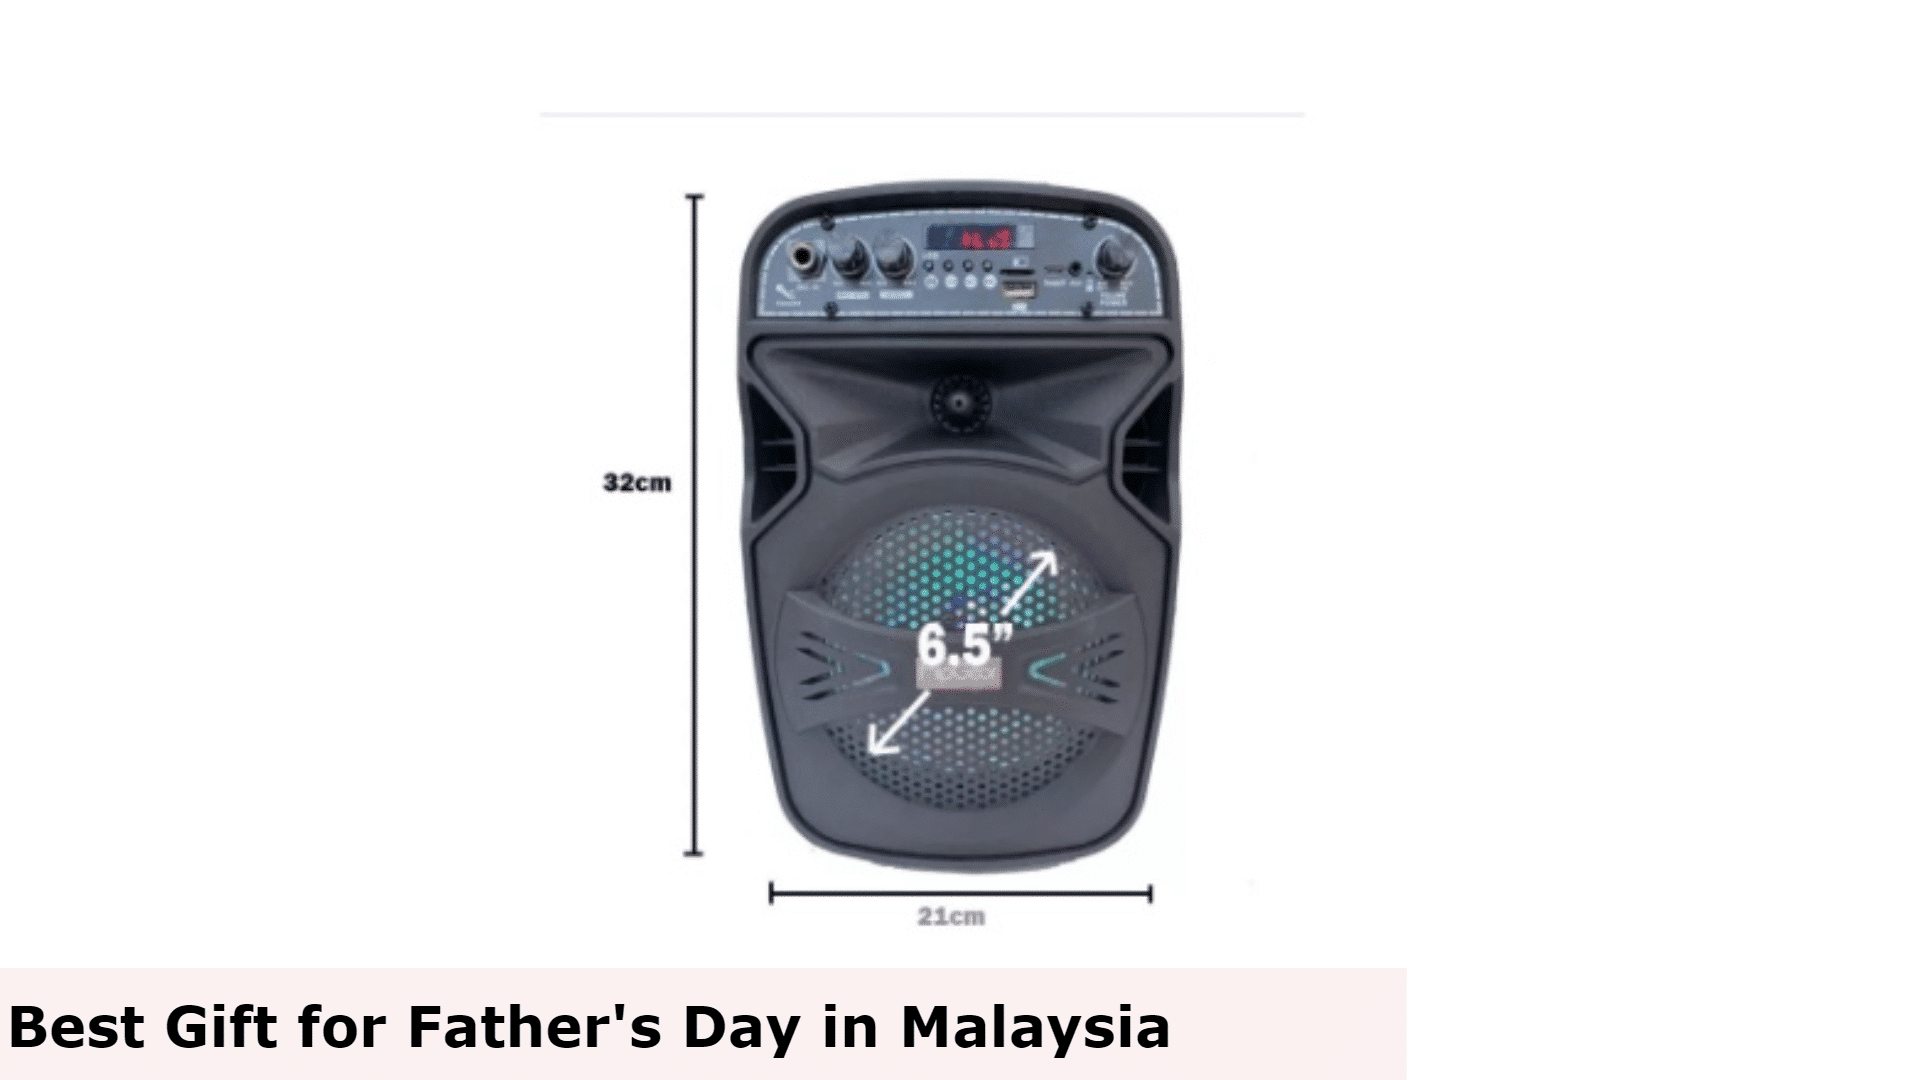 Karaoke Speaker - Best Gift for Father's Day in Malaysia, Best gift for Father's Day Malaysia, Best Father's Day Gifts for Dad, What do dads want for Father's Day in Malaysia?, What is a good cheap gift for Father's Day in Malaysia?, Do you give gifts on Father's Day in Malaysia?, gifts for dad who wants nothing, simple father's day gift ideas, father's day gift ideas 2022, father's day gift ideas during covid, father's day gift ideas from daughter, unique gifts for dad, father's day gift ideas from wife, fathers day gifts from son, What buy for a dad that doesn't want anything?, What to get a dad that is hard to buy for?, What should I get my boring dad for Christmas?, What gifts do dads like?,